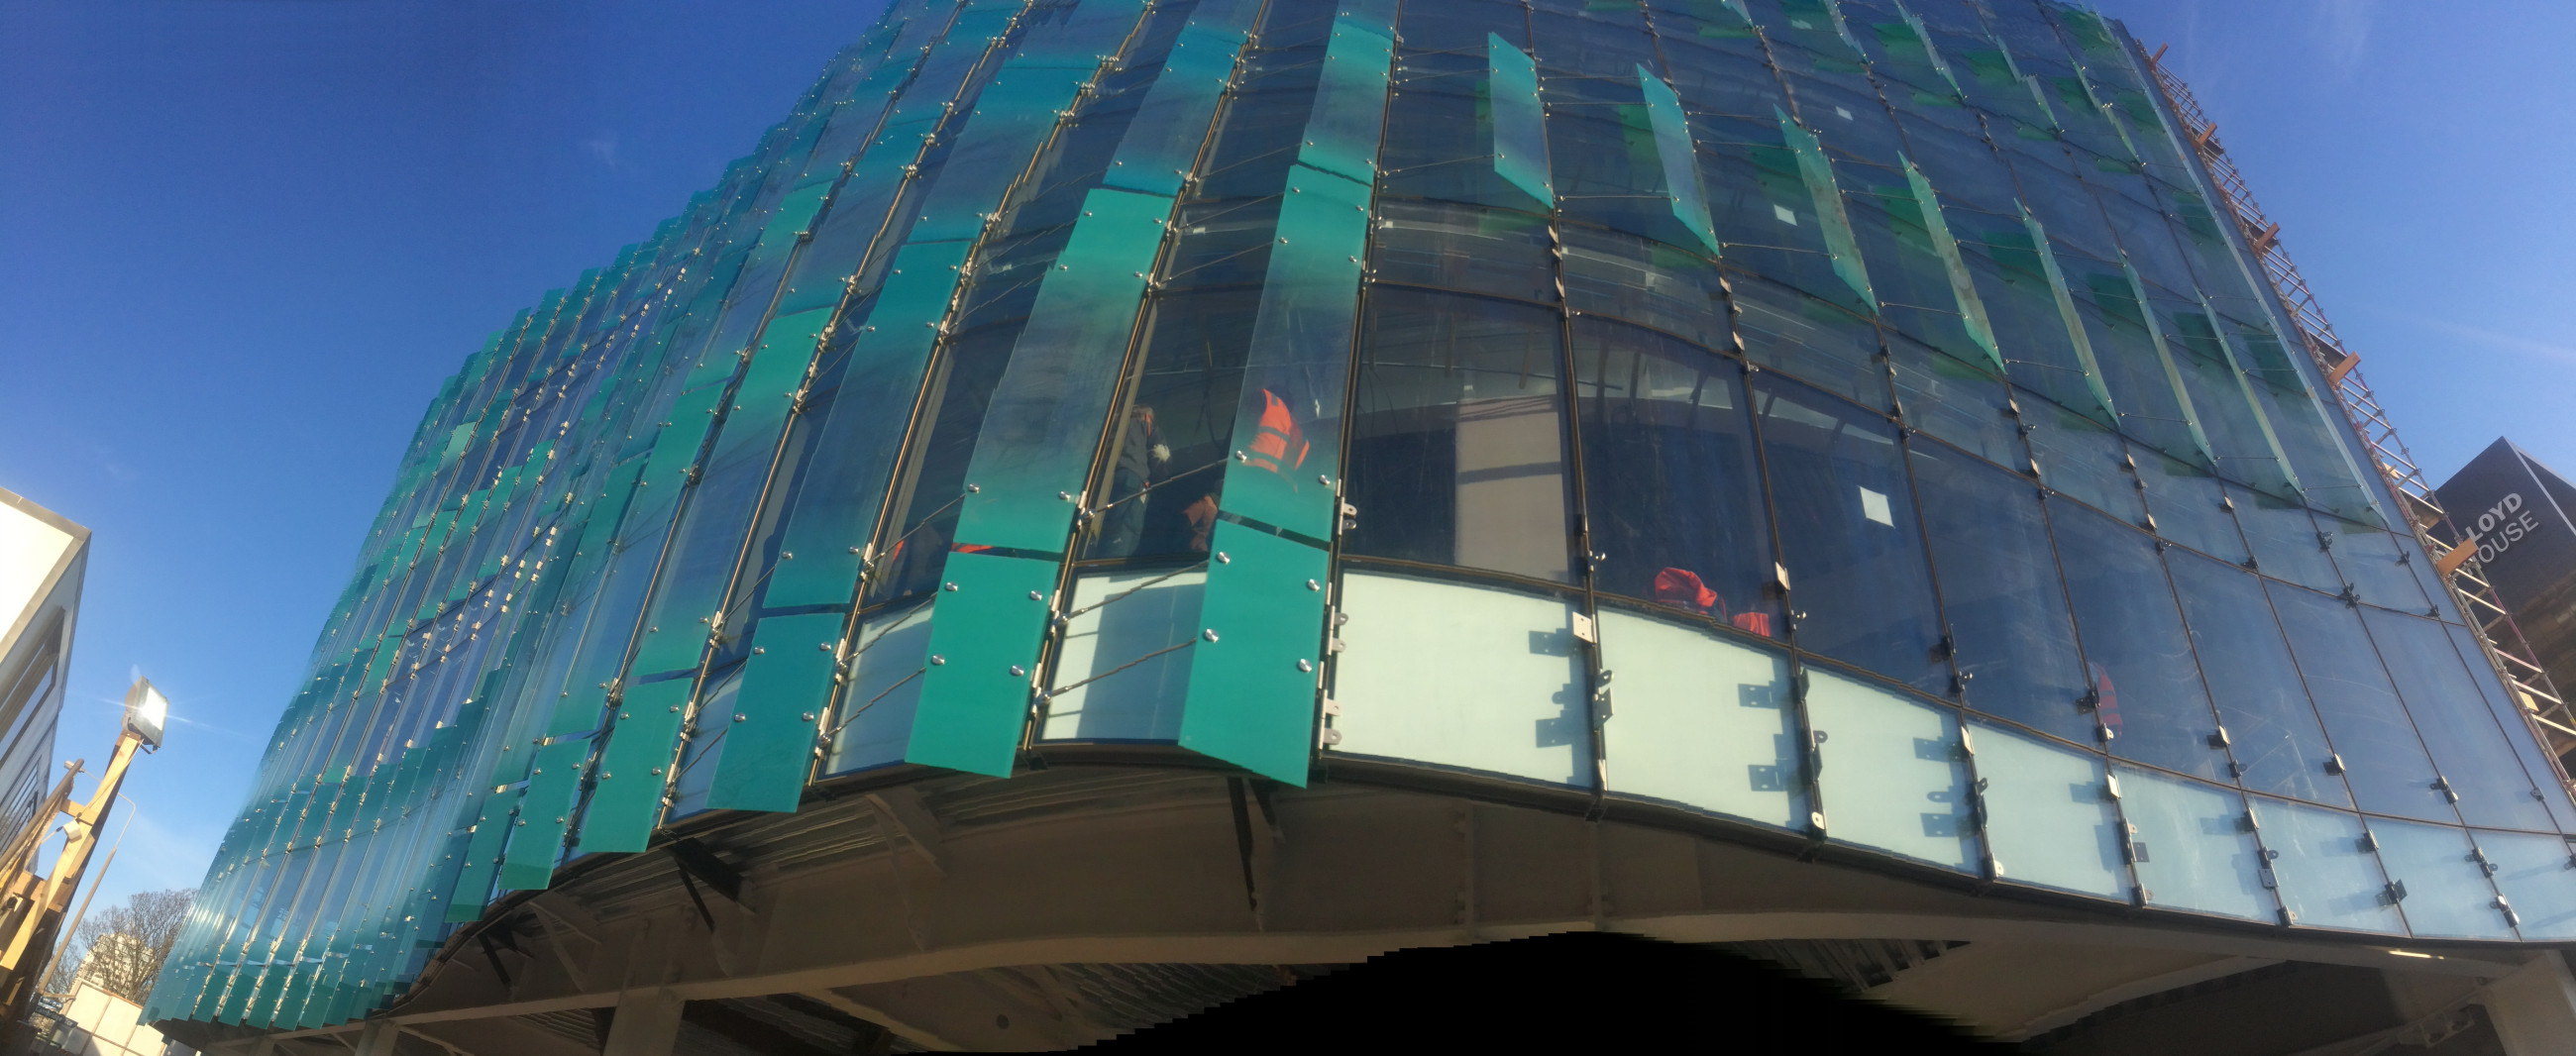 A modern building with glass windows and a highlighted facade against a beautiful blue sky.